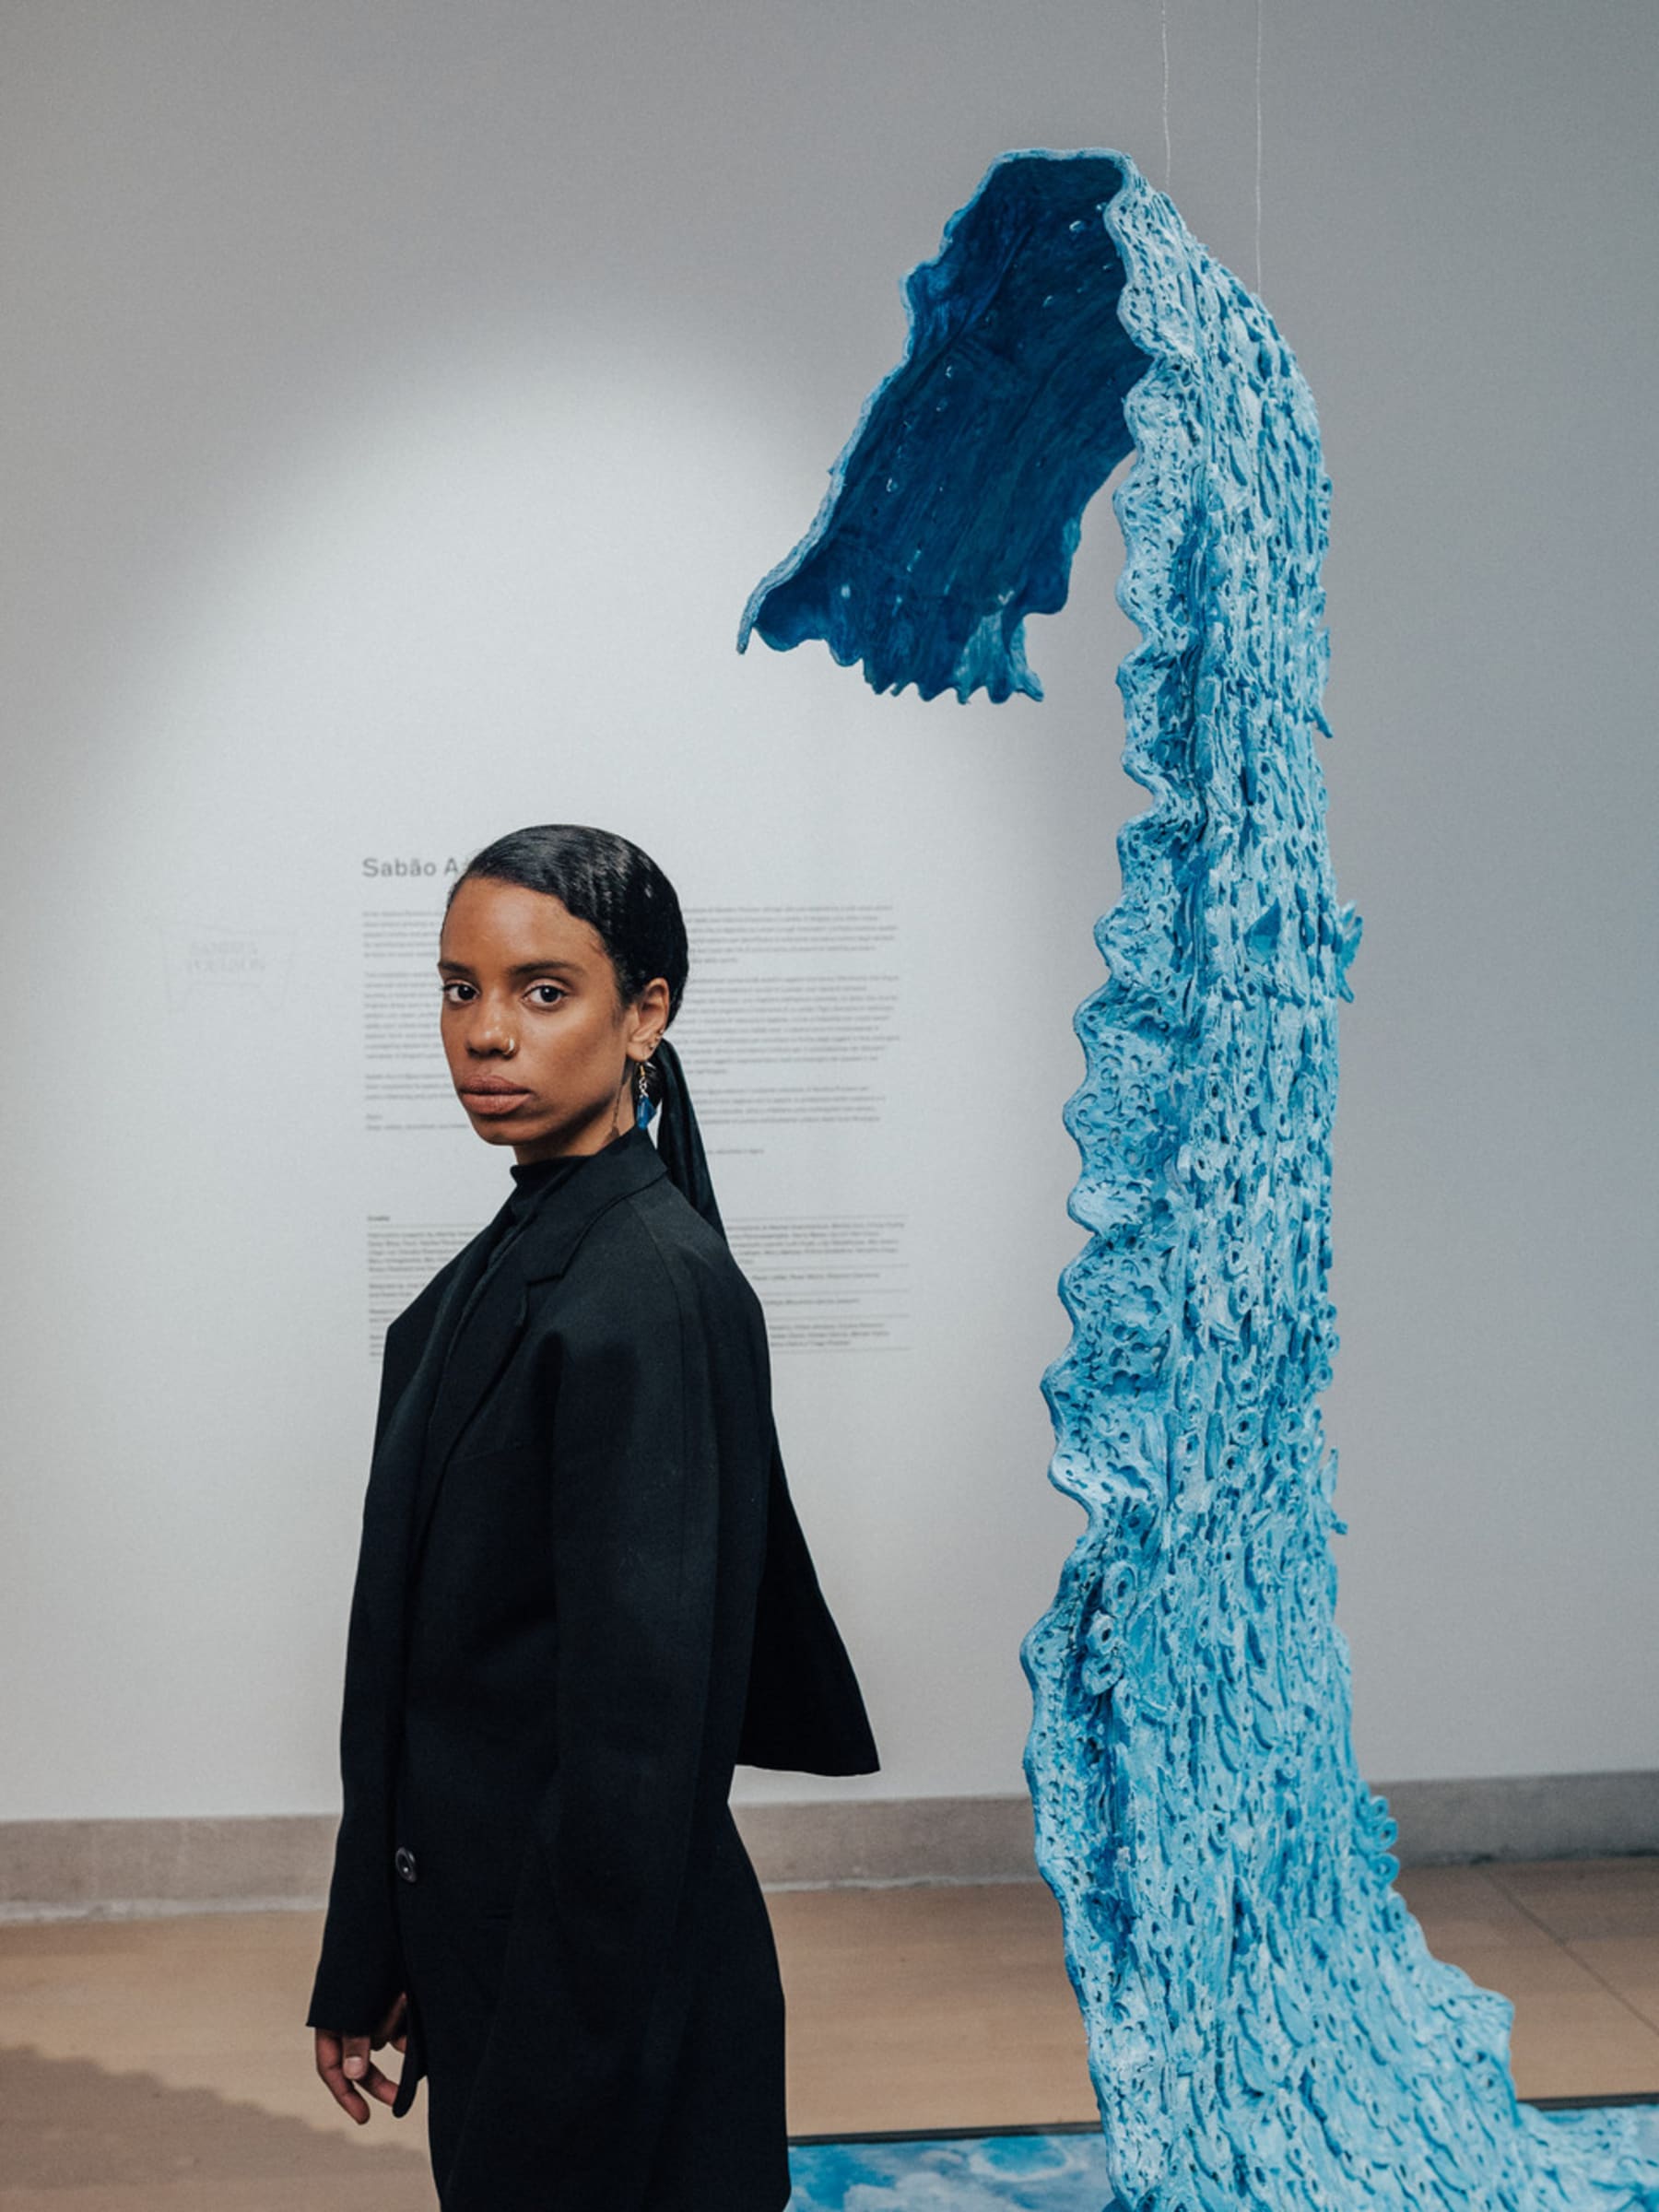 Sandra wears a black suit and  poses next to blue soap sculpture. 